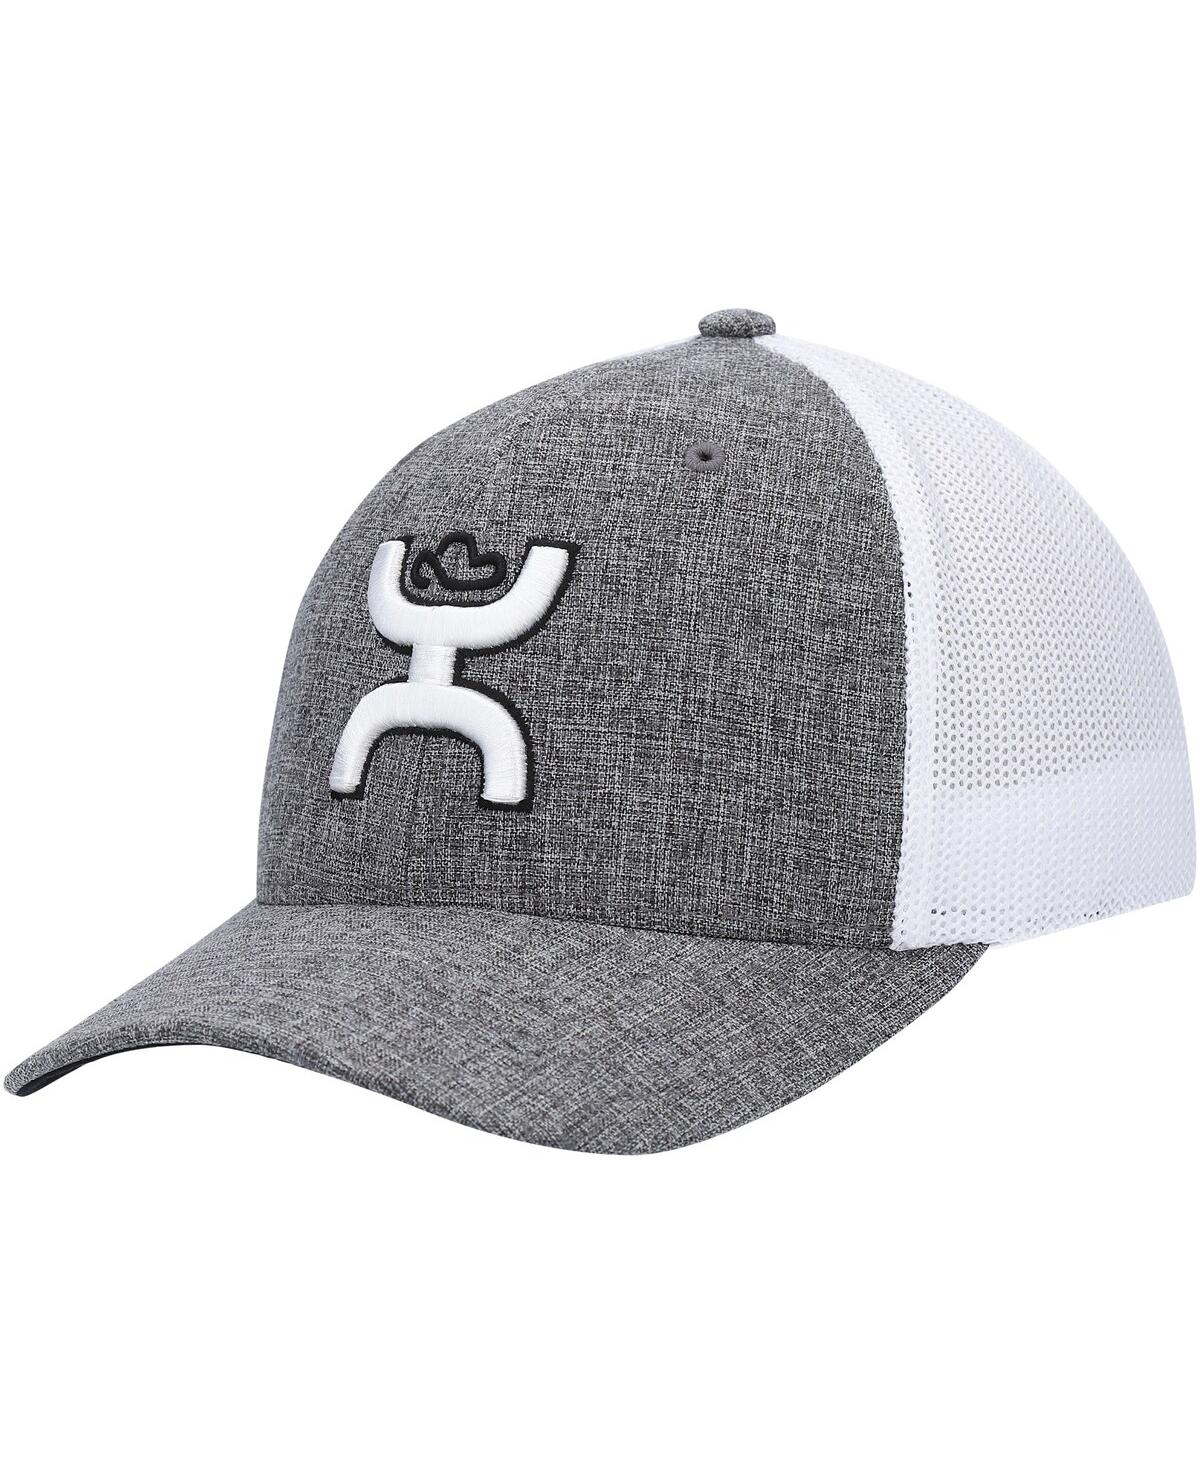 Shop Hooey Men's  Heather Charcoal, White Cayman Flex Hat In Heathered Charcoal,white